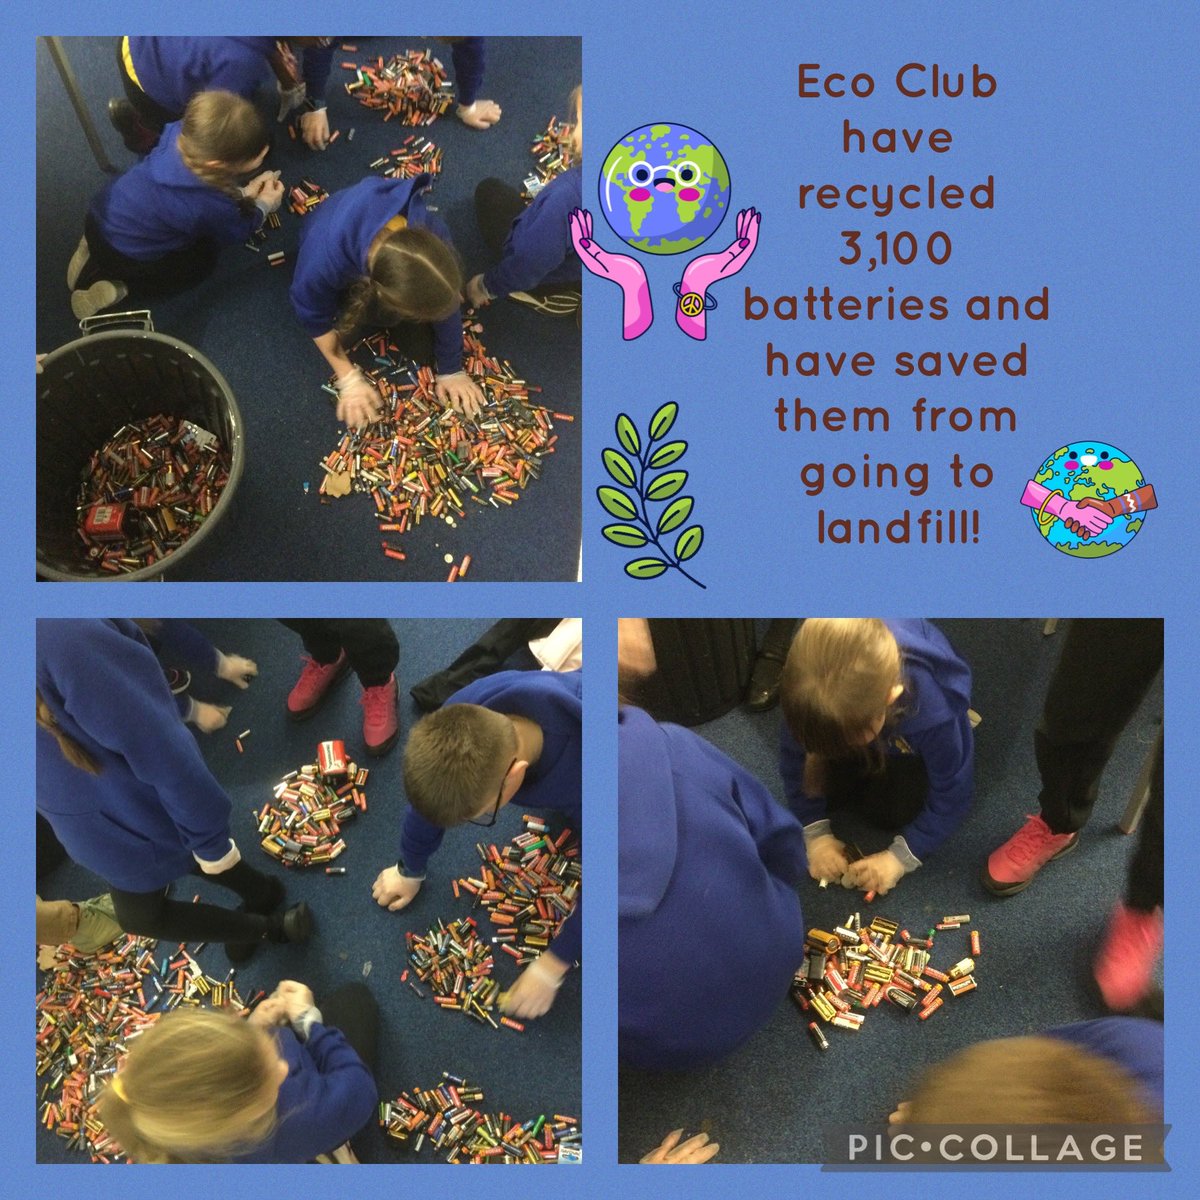 Eco club have been busy recycling batteries. We have collected 3,100 batteries and saved them from landfill. Good job eco ambassadors! You too can be an eco-warrior and collect old batteries and recycle them at our battery bin in school or at a local supermarket.